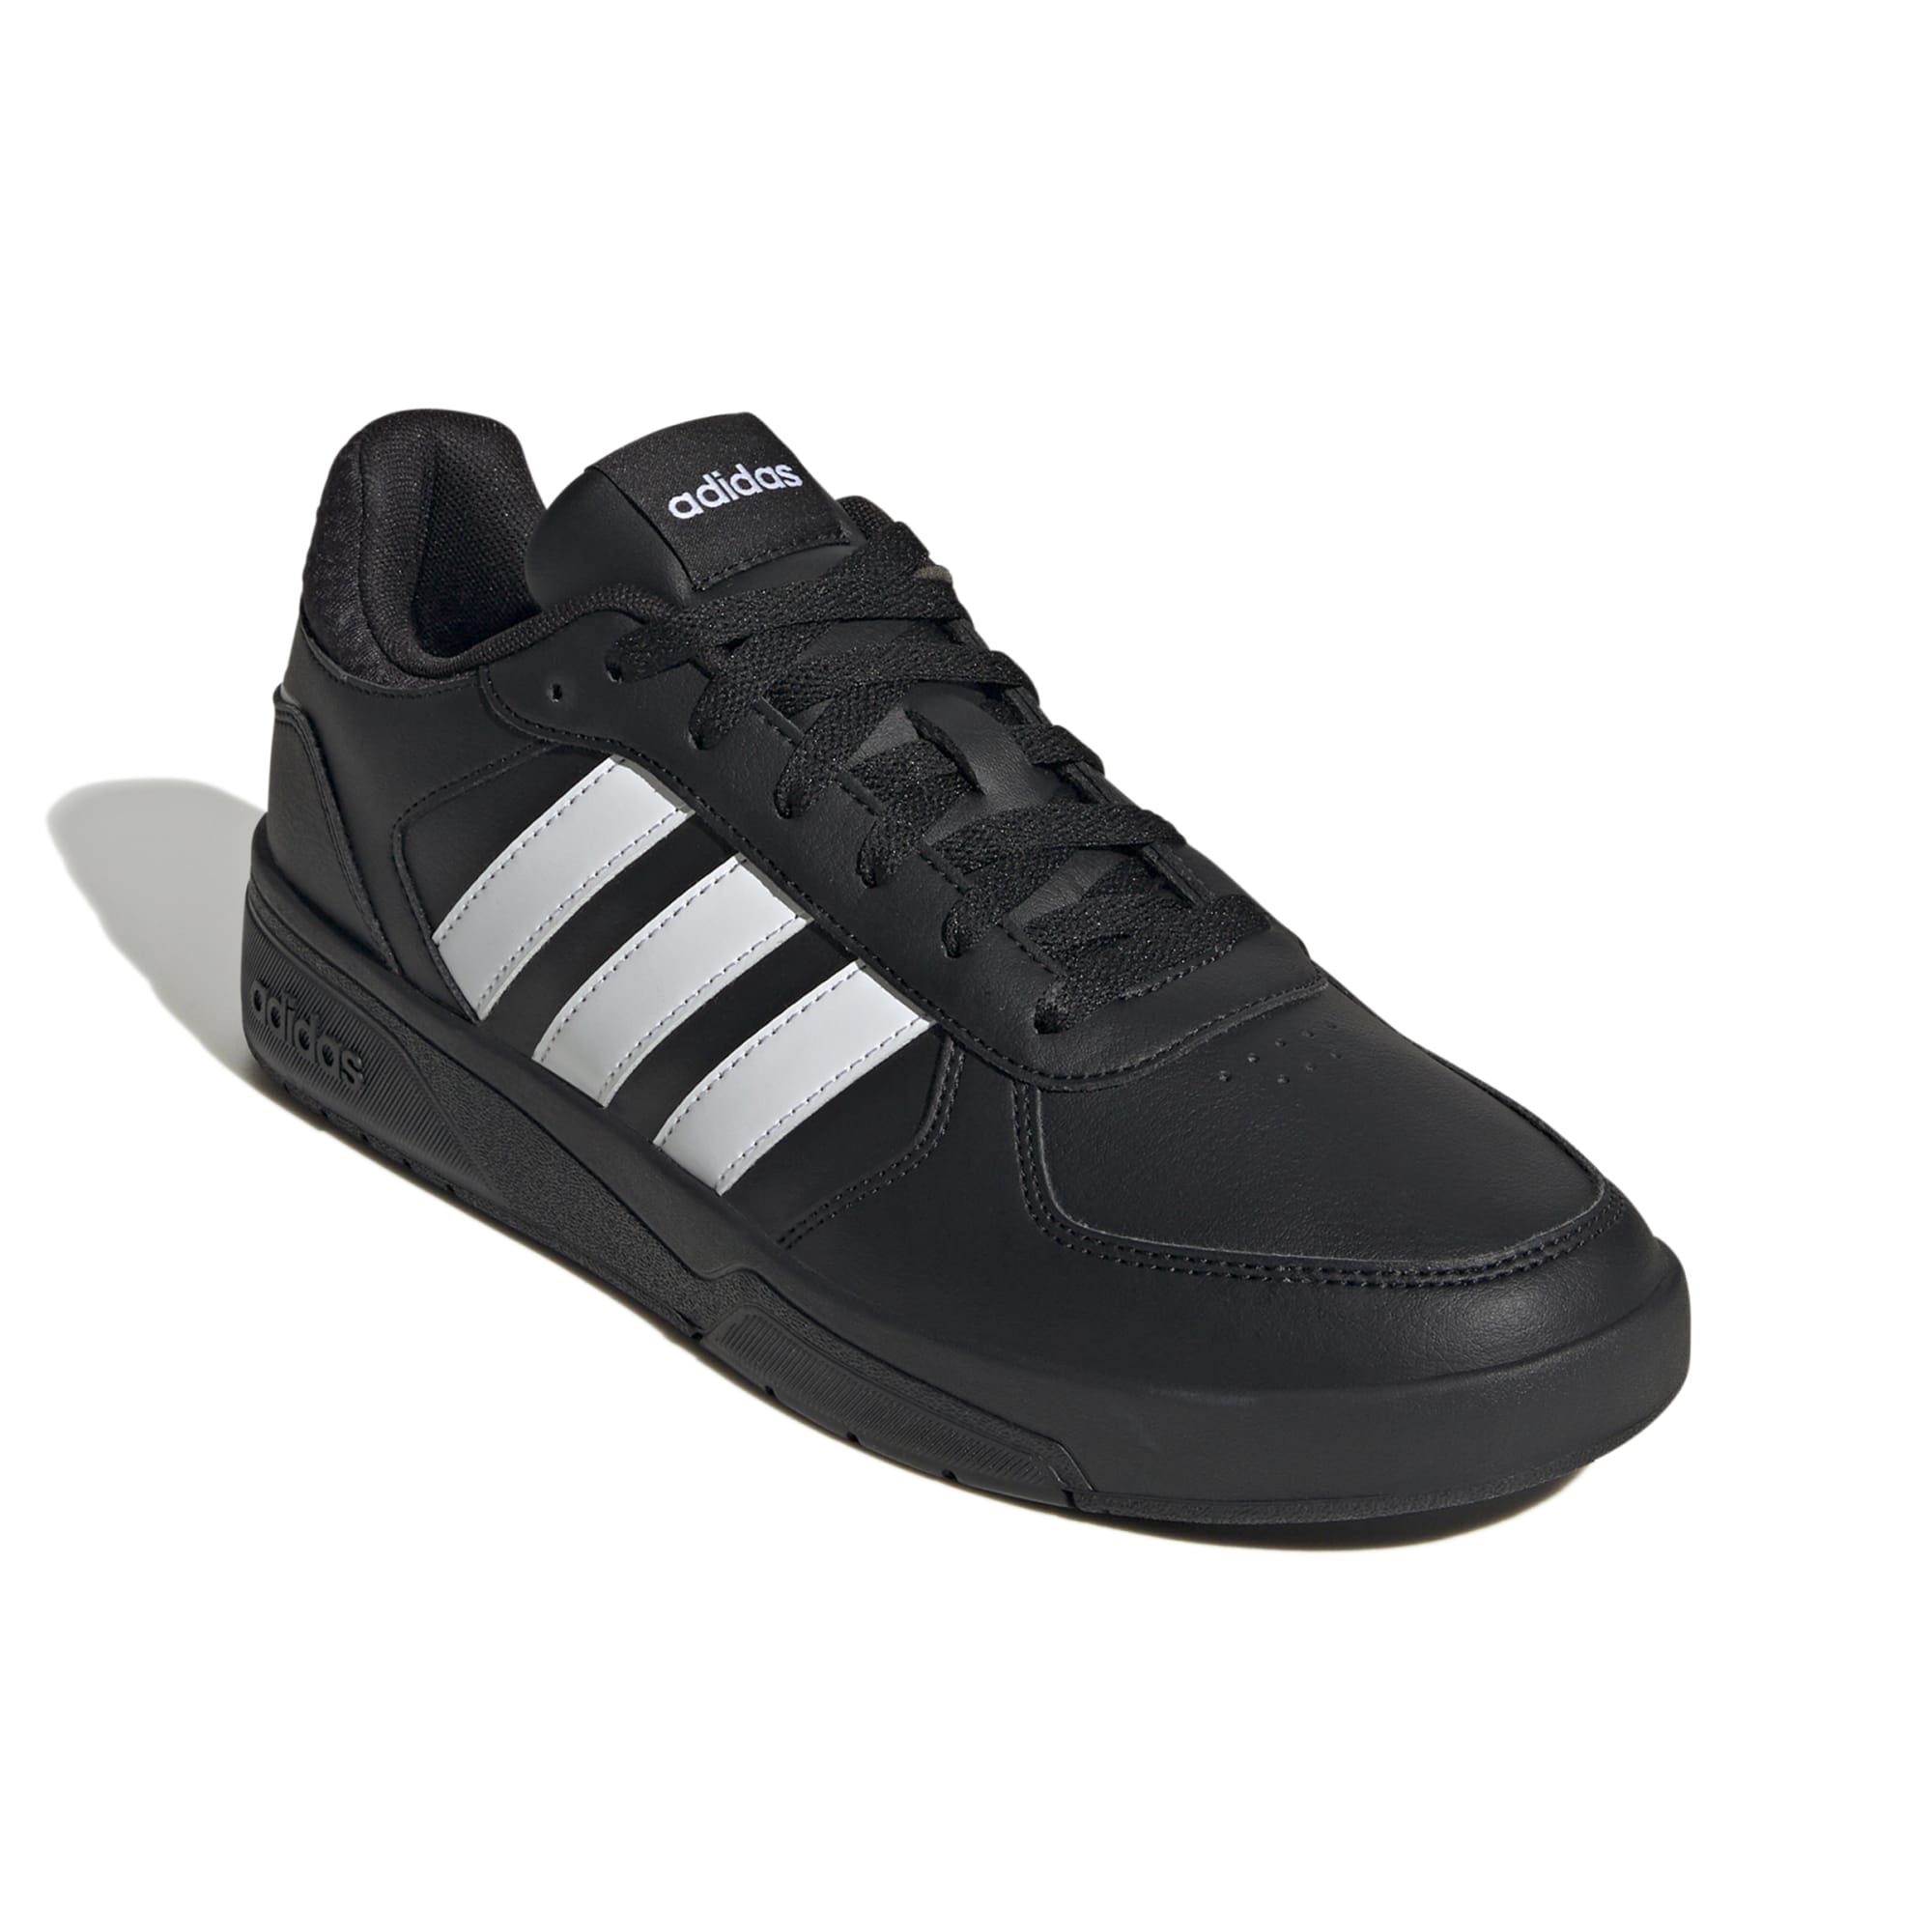 ADIDAS COURTBEAT ID9660 SNEAKER (M)